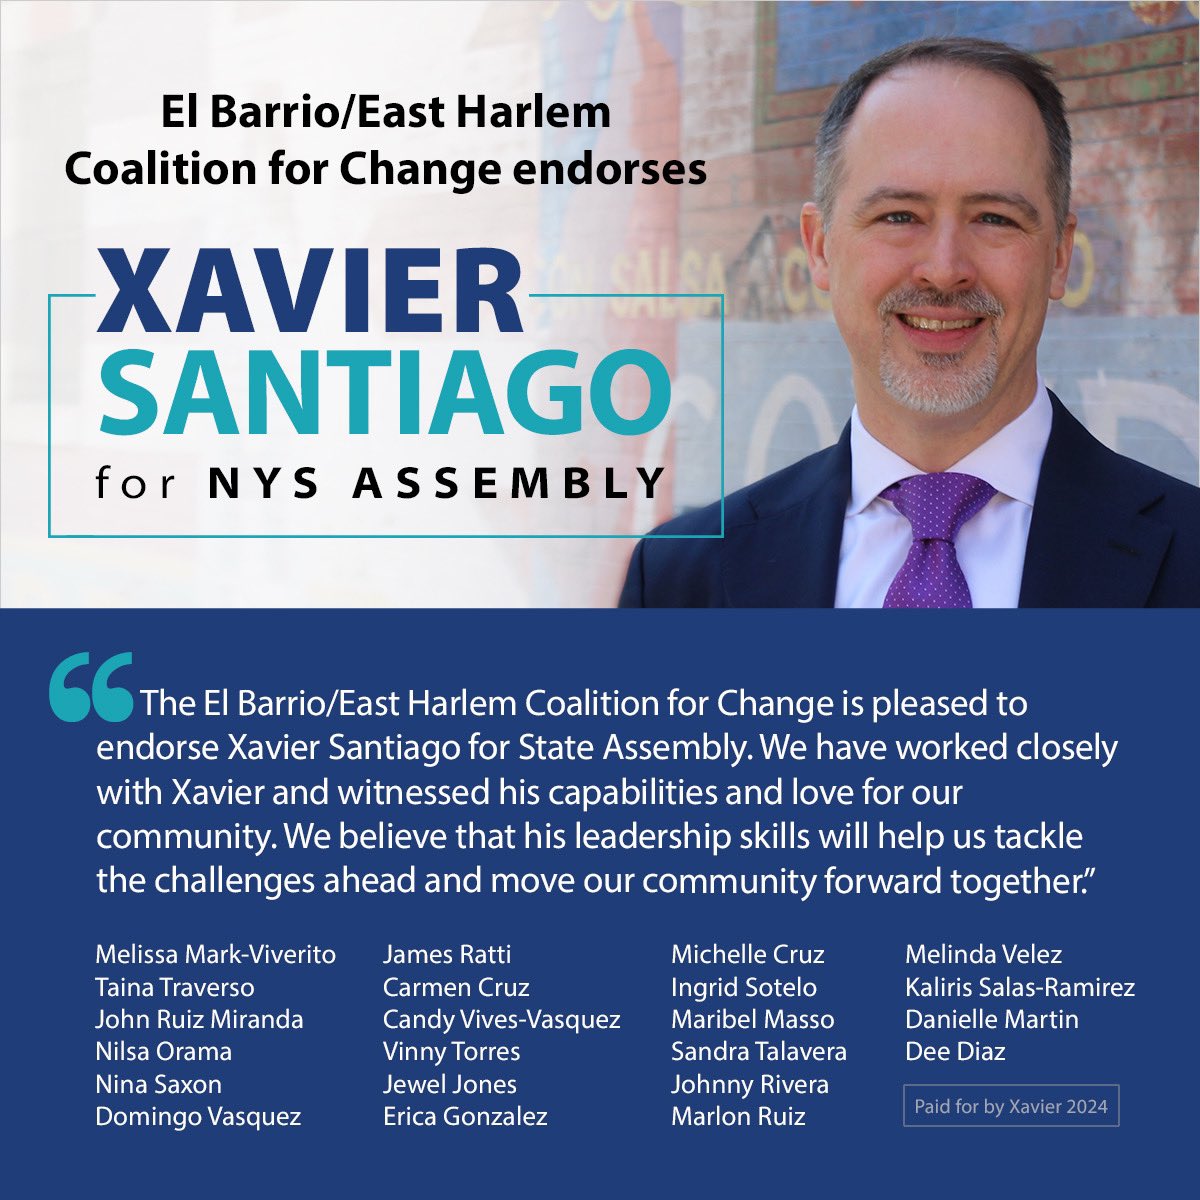 I’m honored to receive the endorsement from the El Barrio/East Harlem Coalition for Change, which includes respected community leaders, two District Leaders, and the former Speaker of the City Council! #inthe68 #humbled #eastharlem #elbarrio